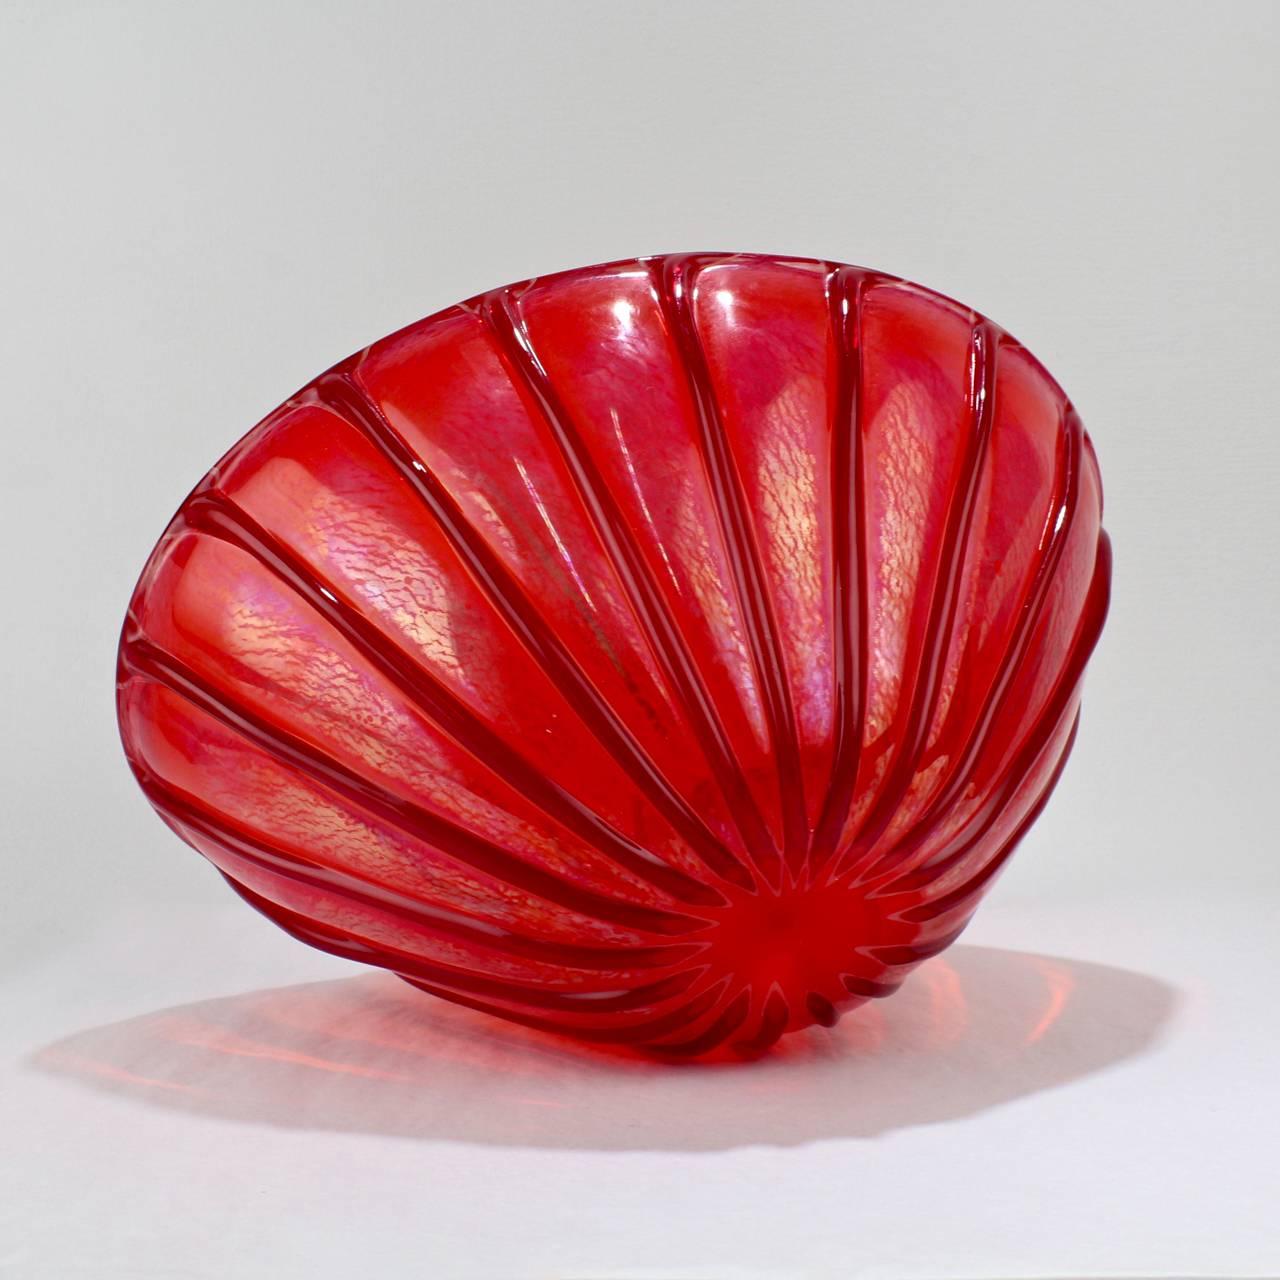 Seguso Viro Limited Edition Nuance Collection Red Murano Glass Vase or Bowl 3